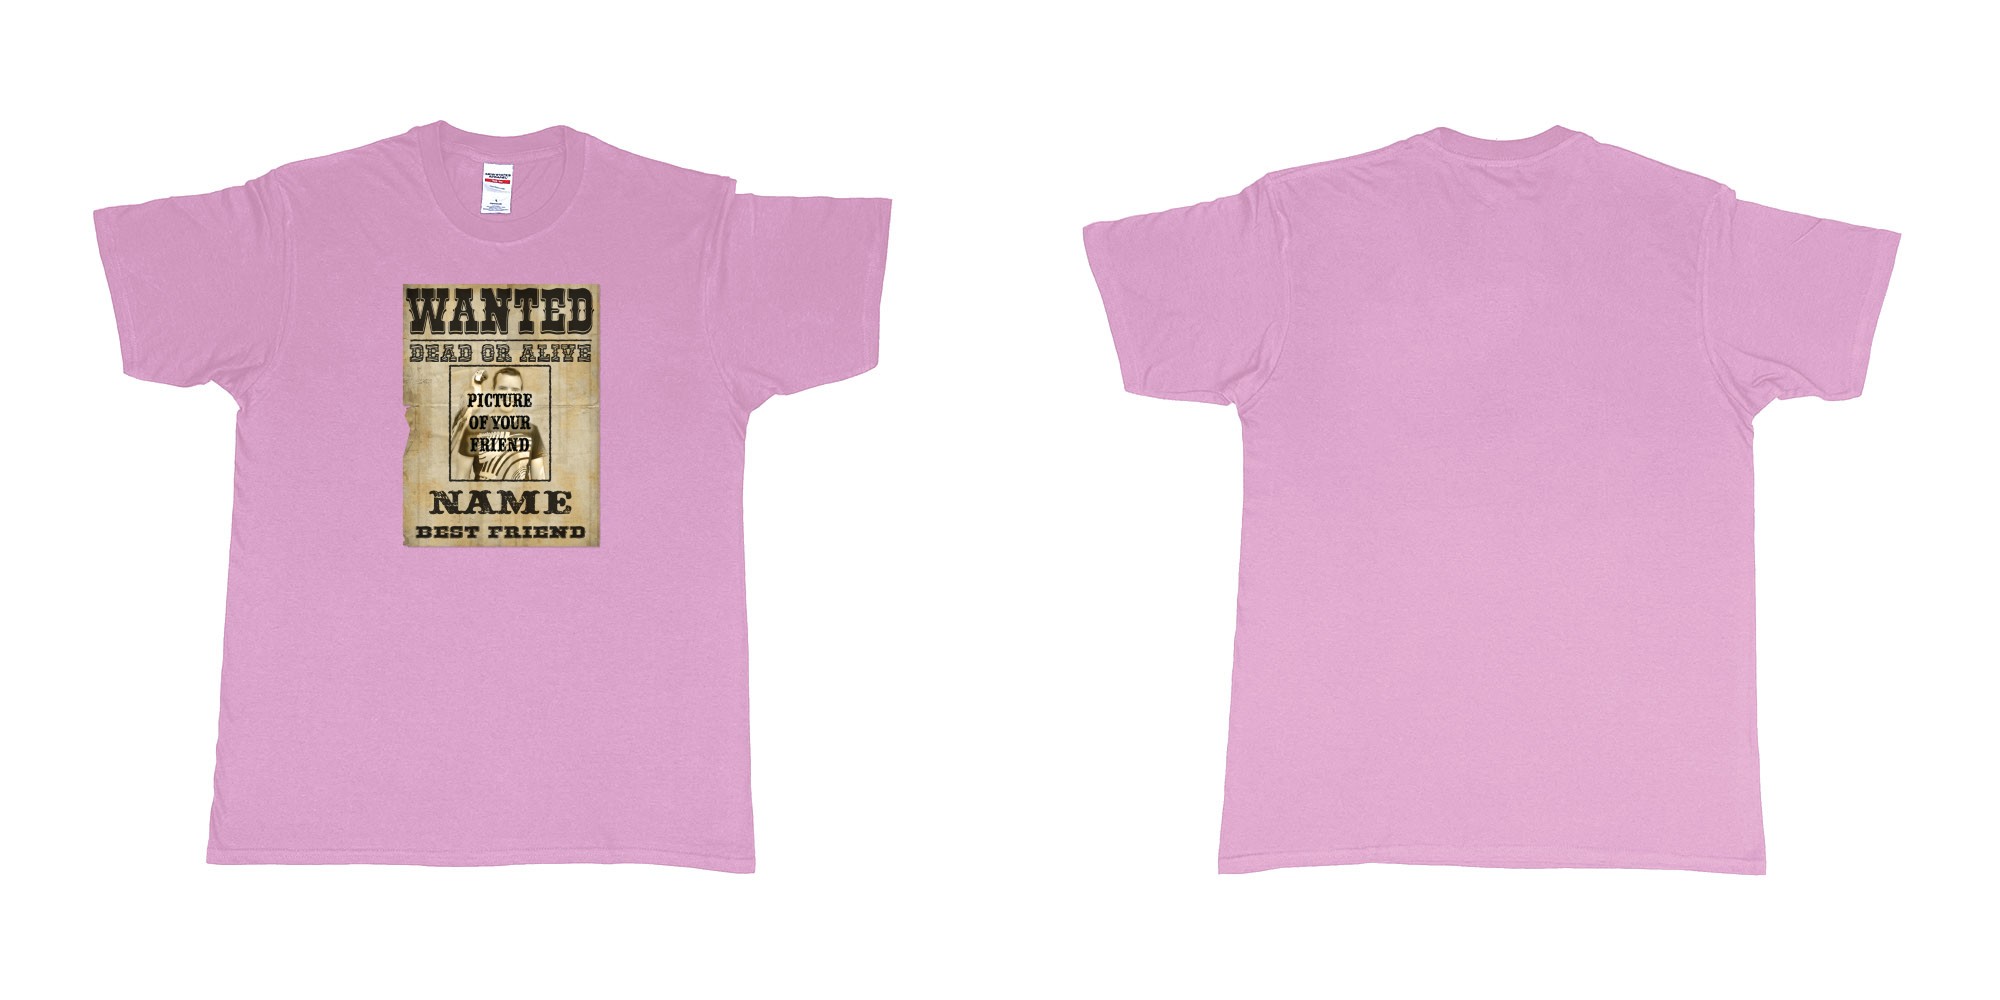 Custom tshirt design Wanted Poster in fabric color light-pink choice your own text made in Bali by The Pirate Way